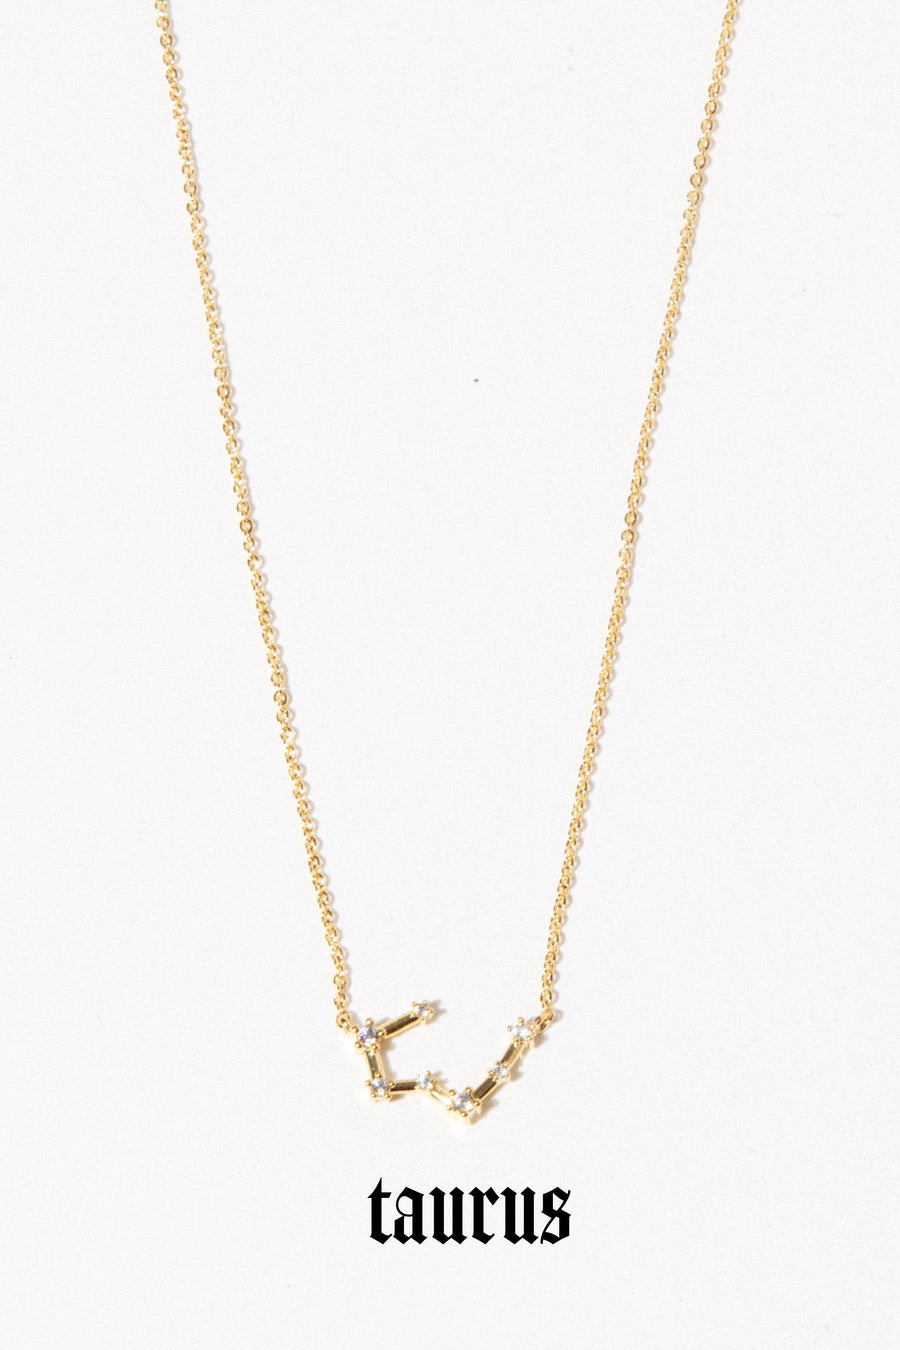 charis Jewelry Taurus / 16 Inches / Gold Constellation Necklace